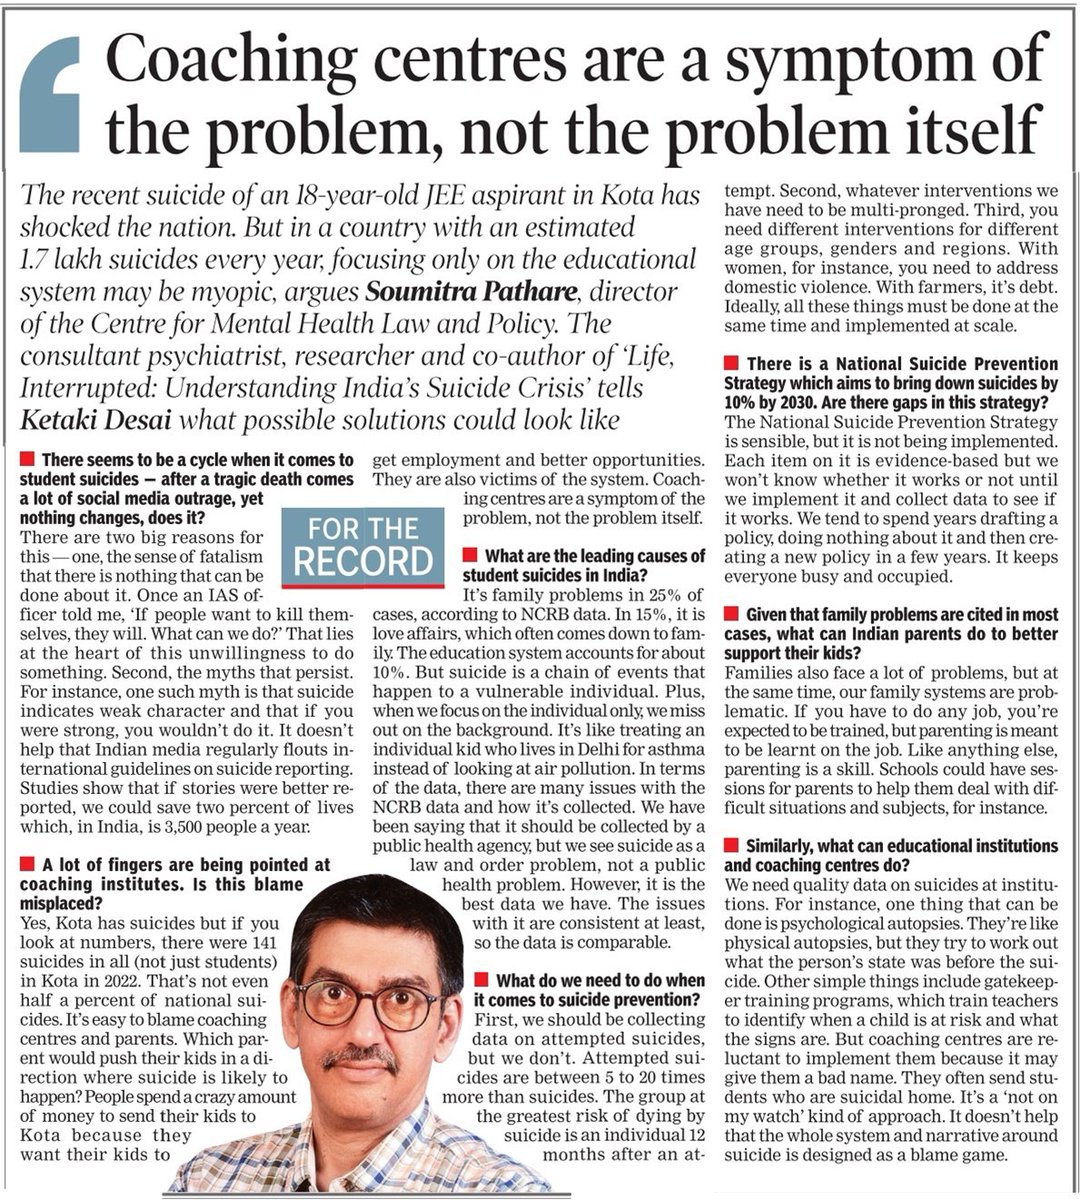 I interviewed @netshrink about the larger problems behind India's student suicides, beyond just coaching centres, and what prevention could (and should) look like